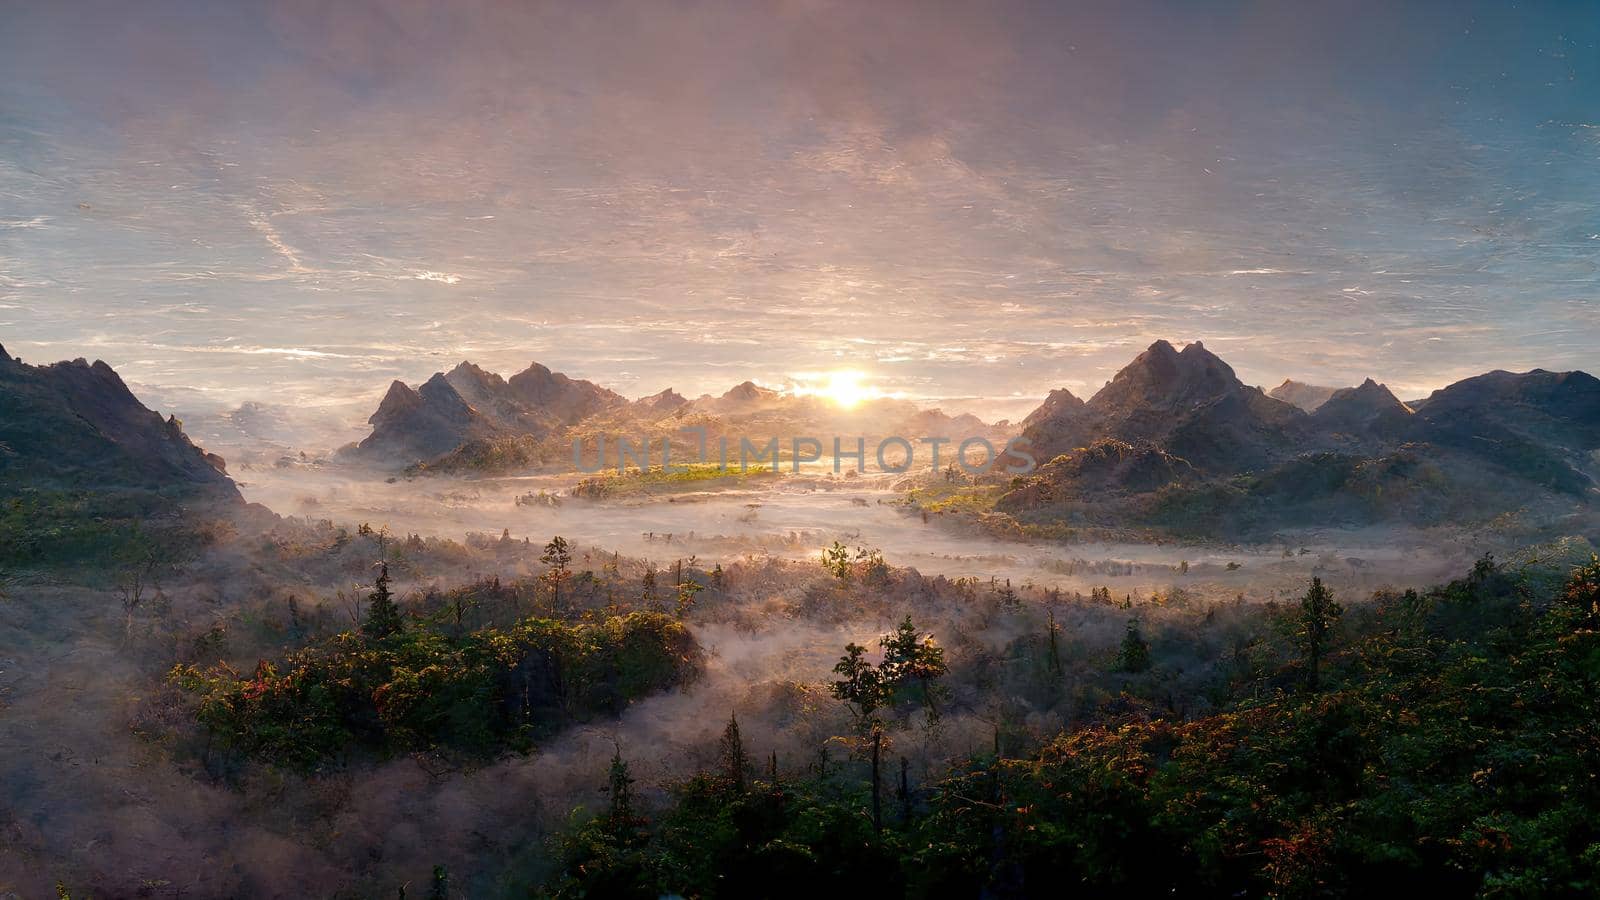 Mountain plain at dawn with fog between trees and high hills and mountains in the background.